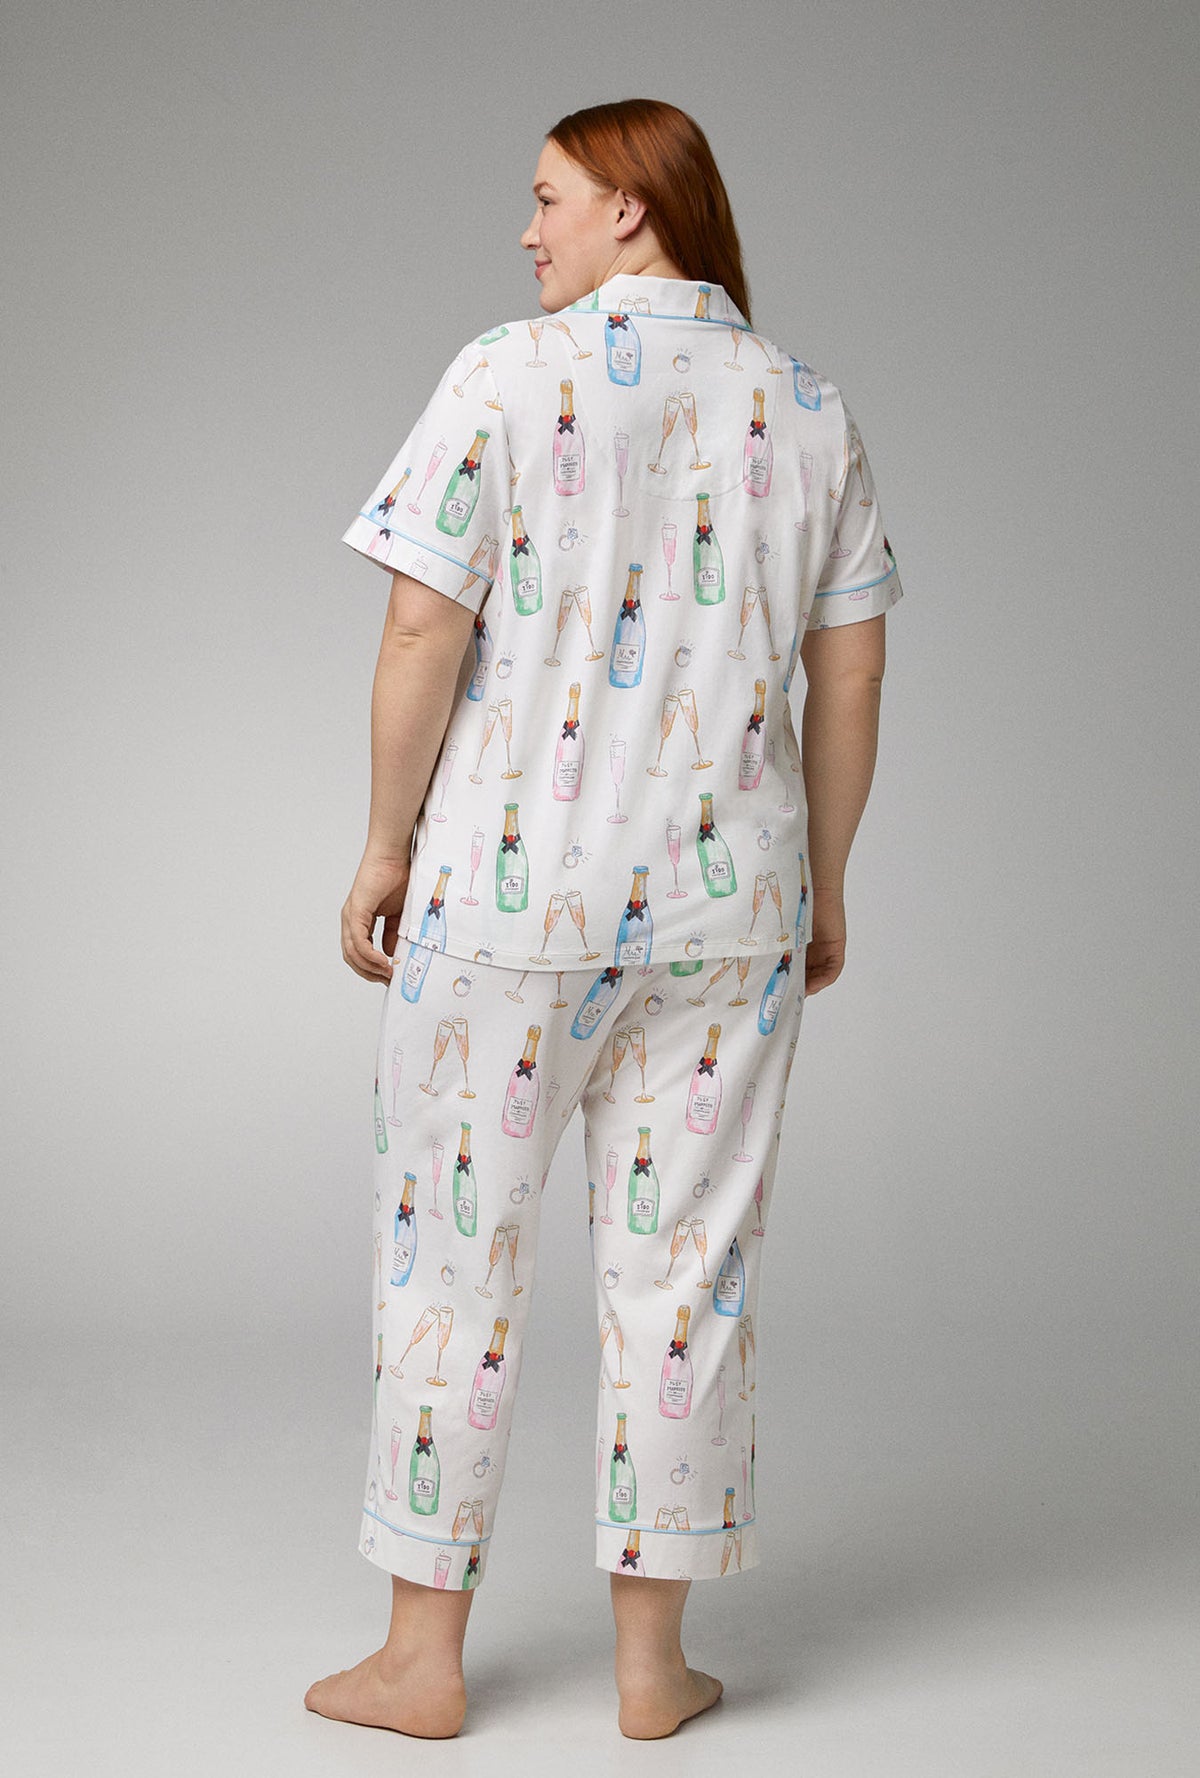 A lady wearing Short Sleeve Classic Stretch Jersey Cropped plus size  PJ Set with Champagne Wedding print